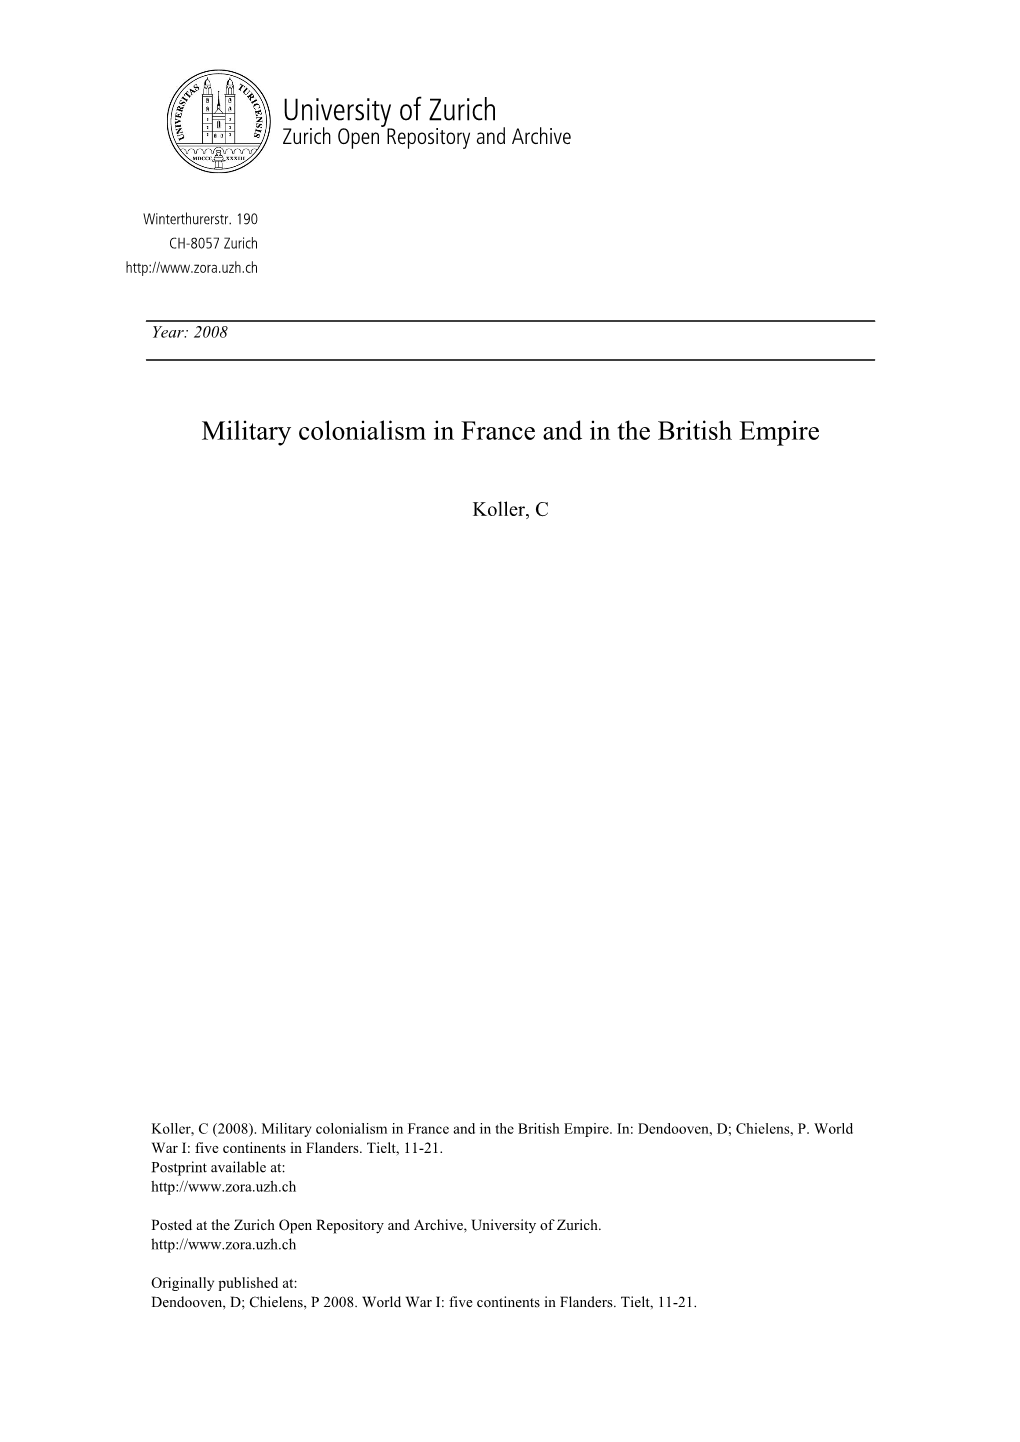 Military Colonialism in France and in the British Empire